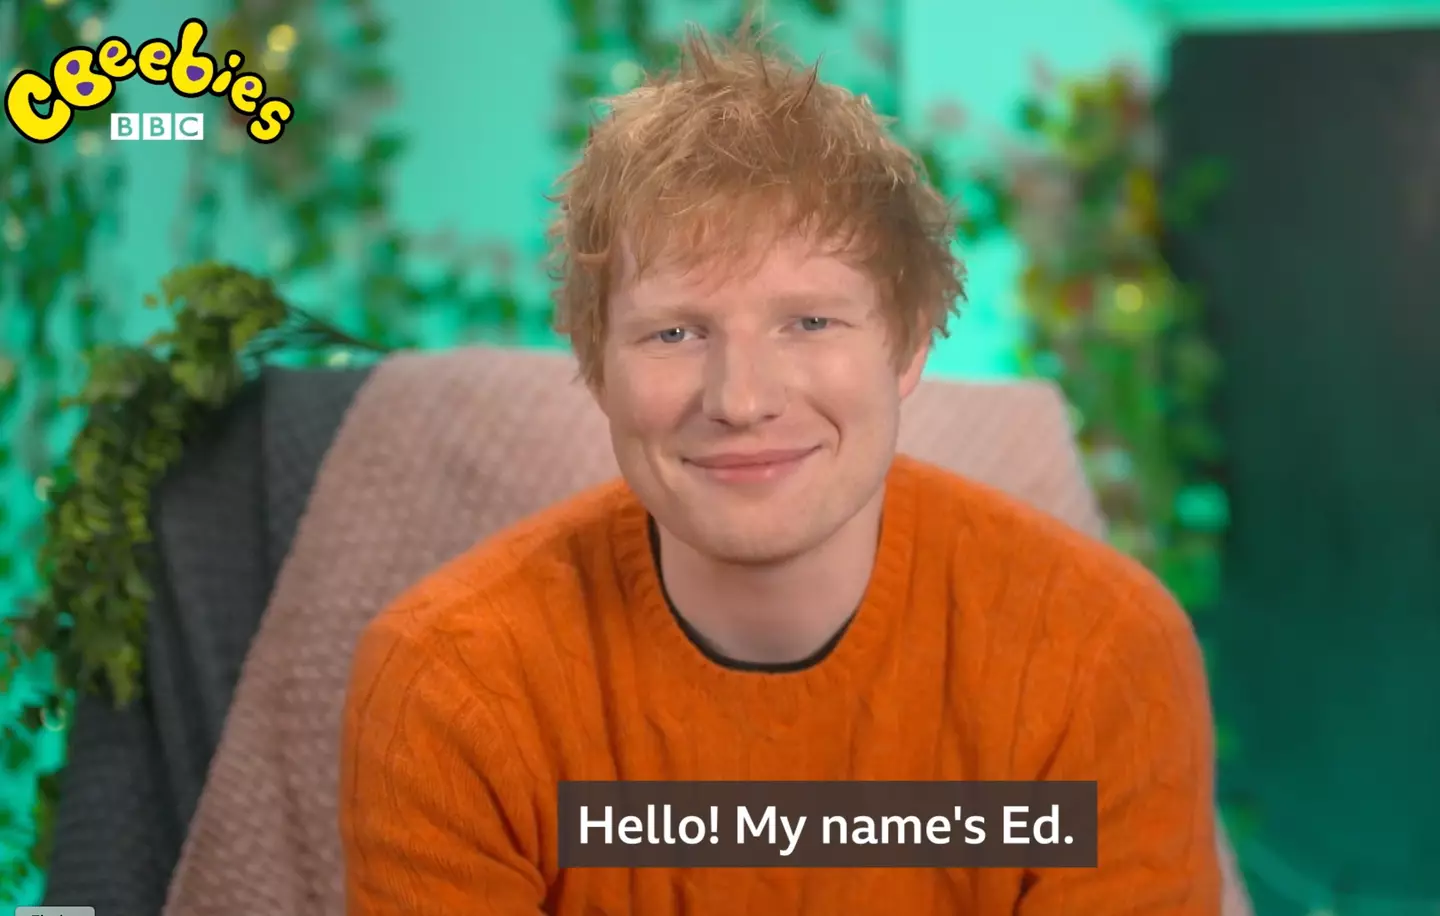 Ed will be making an appearance on Friday 5th November at 6.50pm (